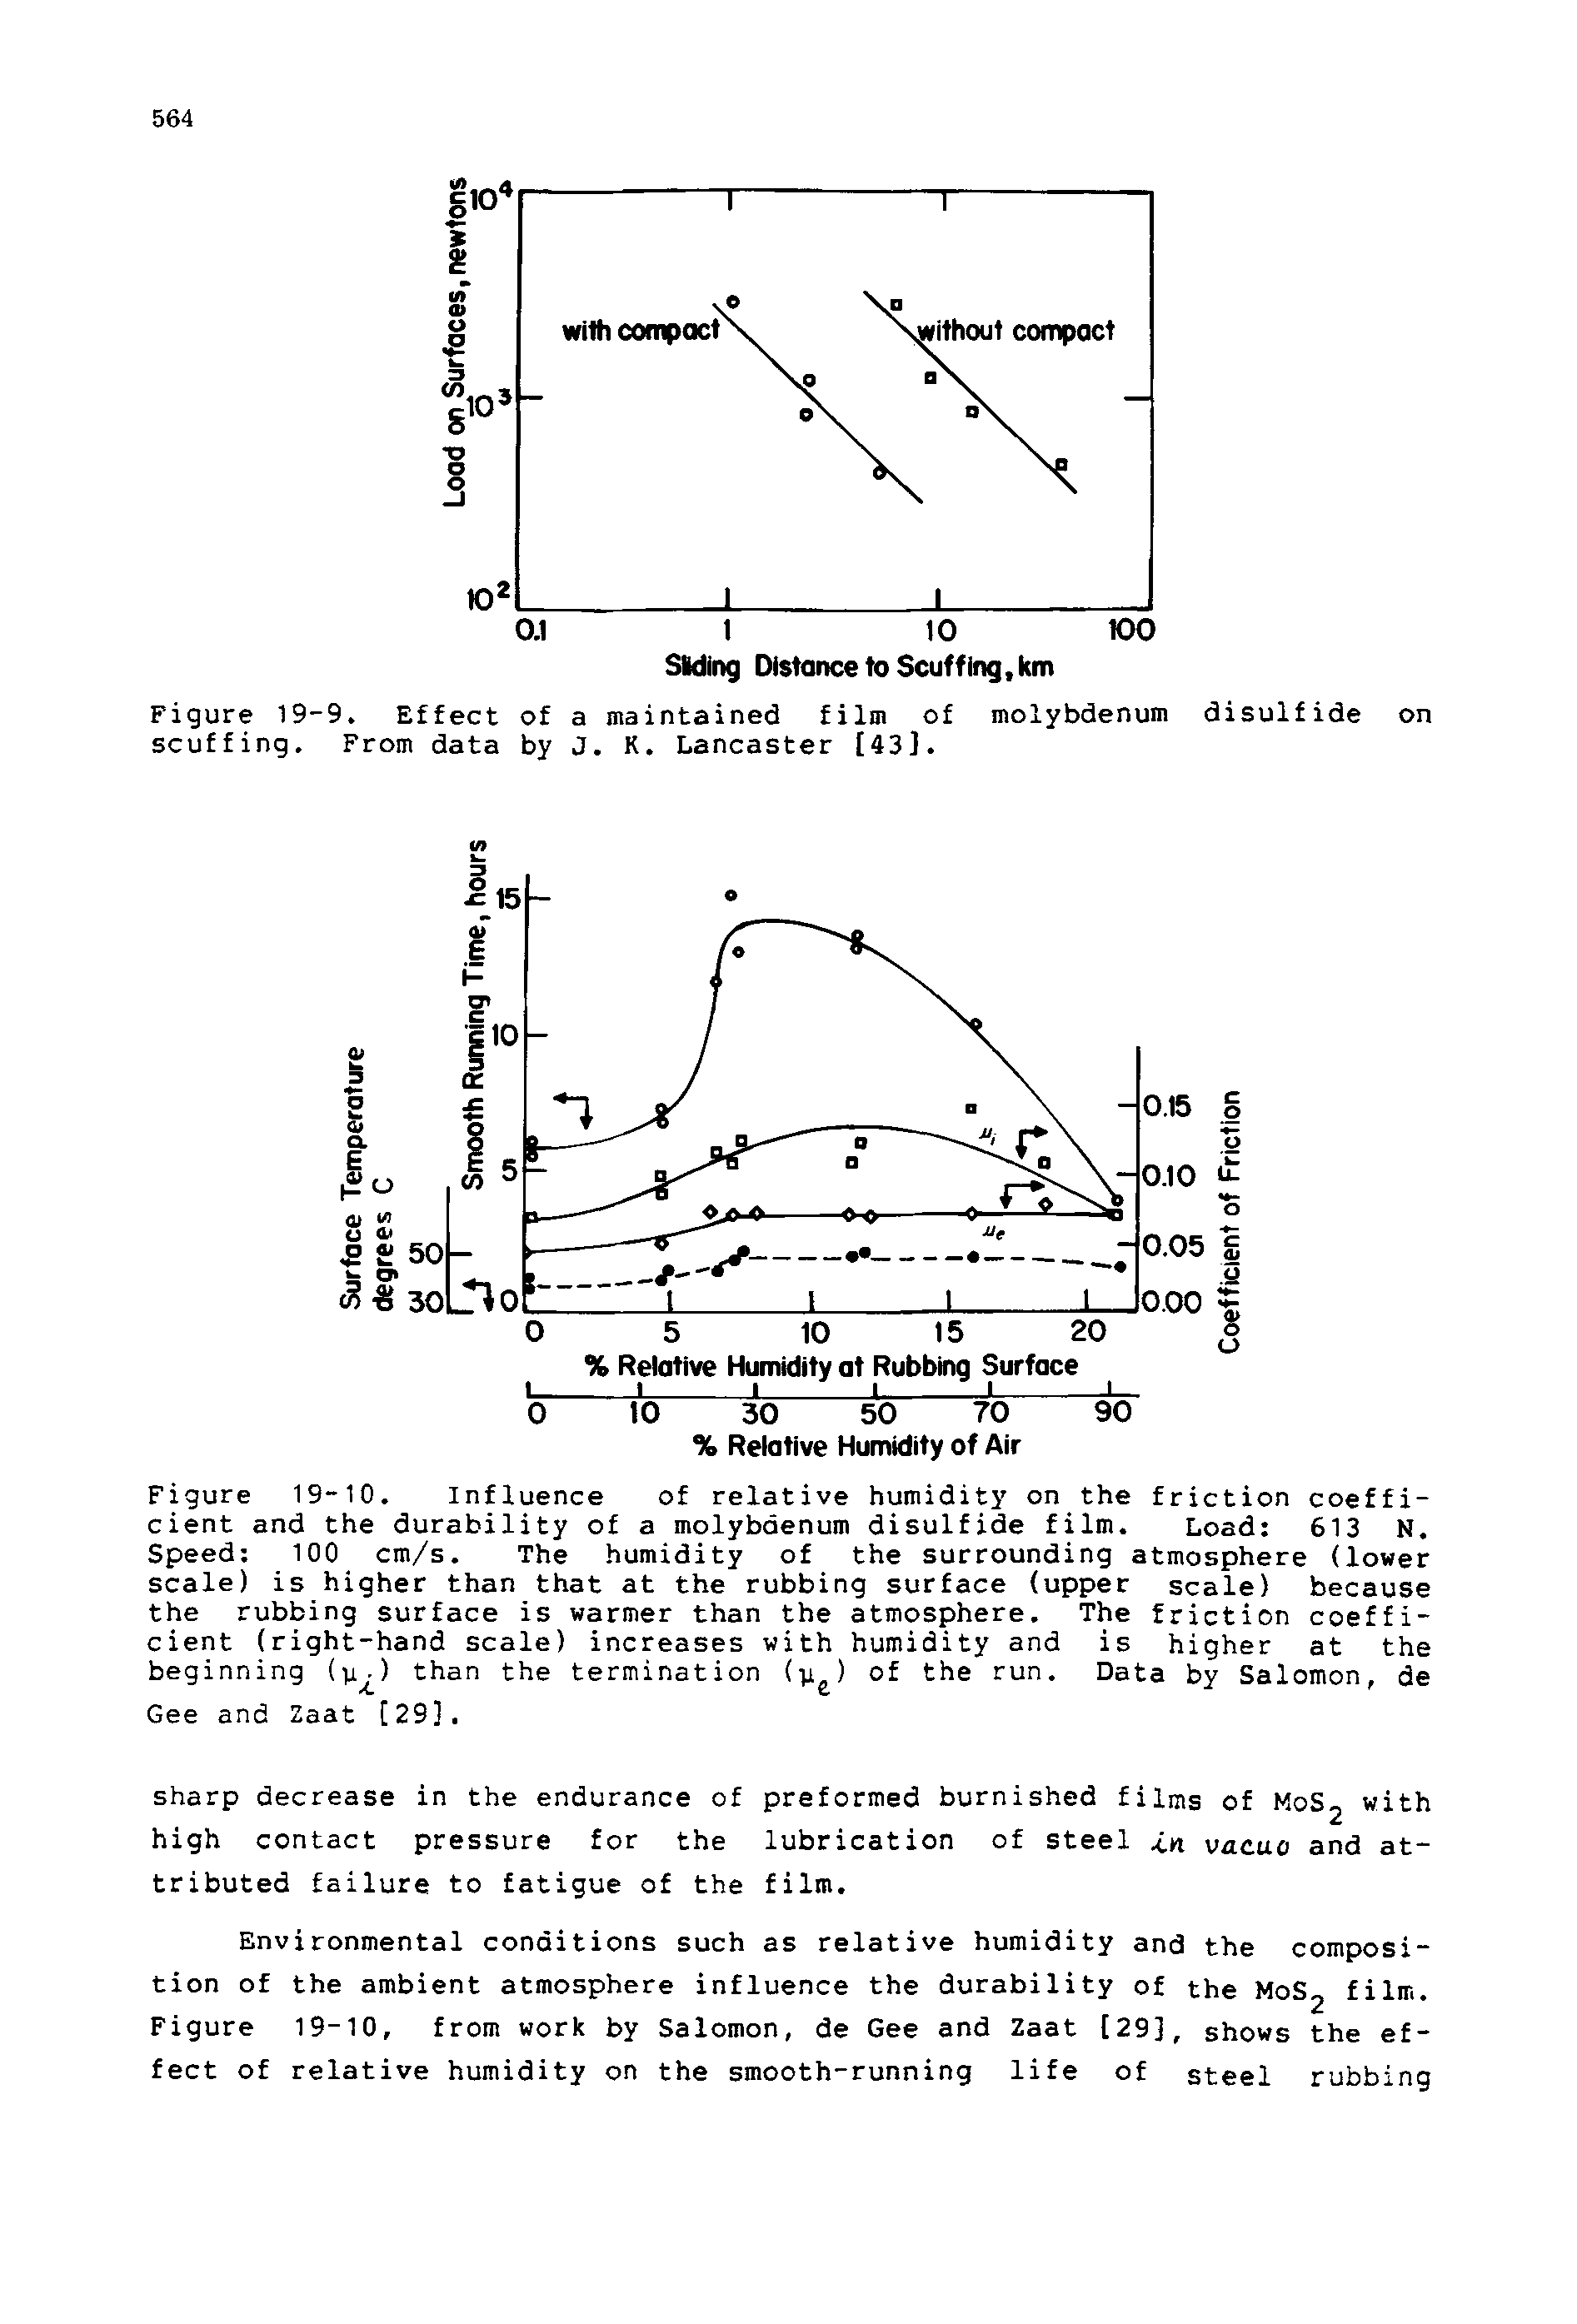 Figure 19-10. Influence of relative humidity on the friction coefficient and the durability of a molybdenum disulfide film. Load 513 N. Speed 100 cm/s. The humidity of the surrounding atmosphere (lower scale) is higher than that at the rubbing surface (upper scale) because the rubbing surface is warmer than the atmosphere. The friction coefficient (right-hand scale) increases with humidity and is higher at the beginning (u ) than the termination (p ) of the run. Data by Salomon, de...